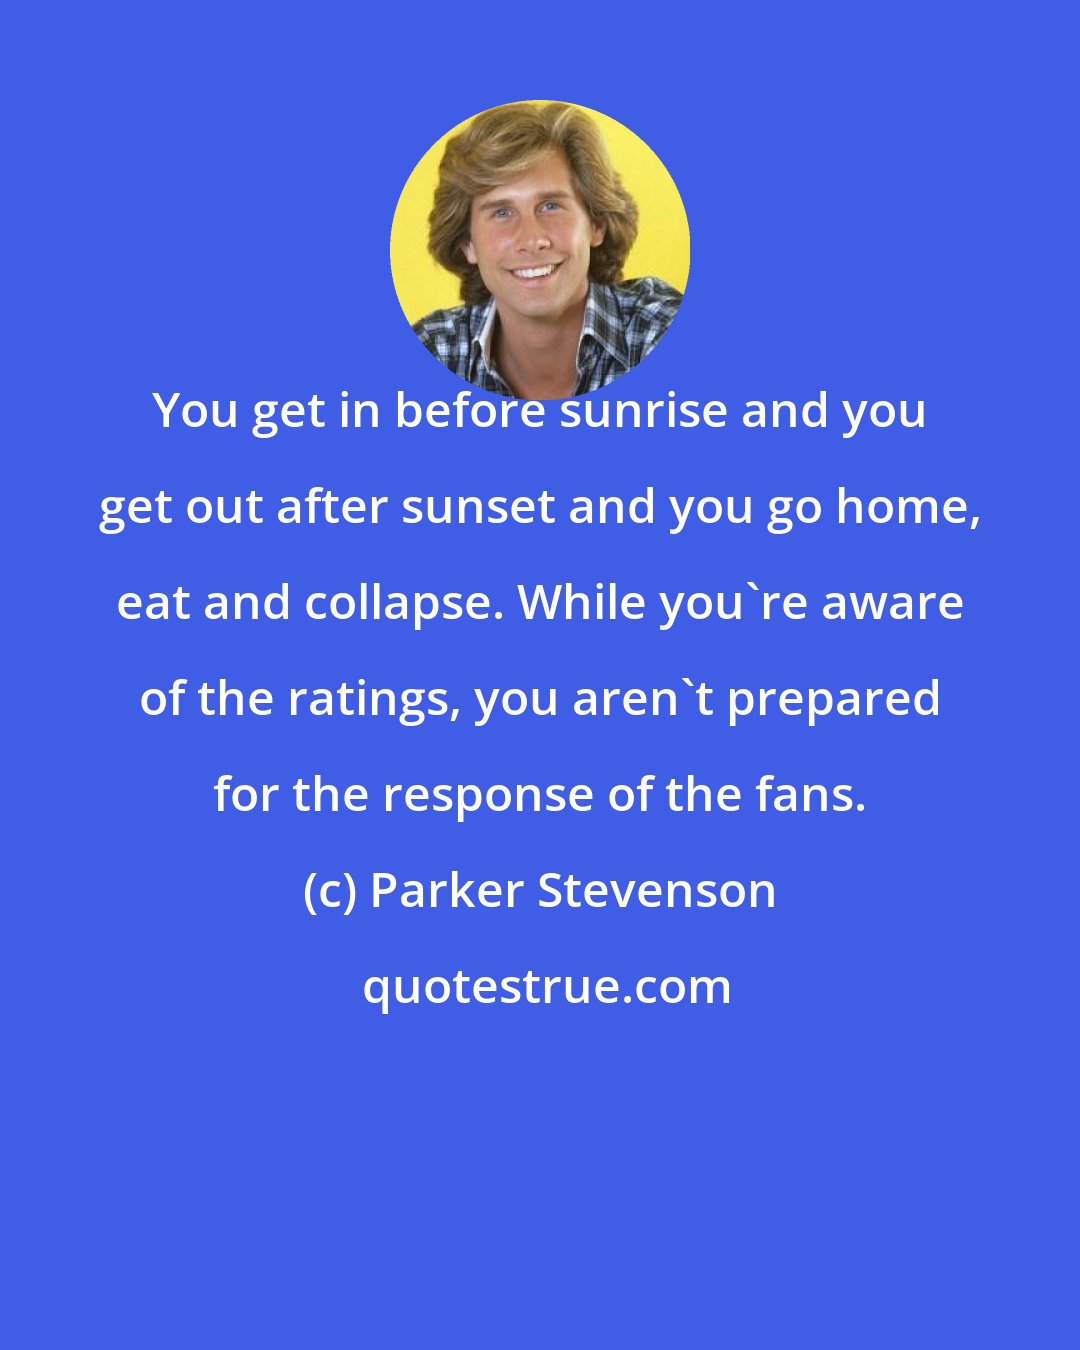 Parker Stevenson: You get in before sunrise and you get out after sunset and you go home, eat and collapse. While you're aware of the ratings, you aren't prepared for the response of the fans.